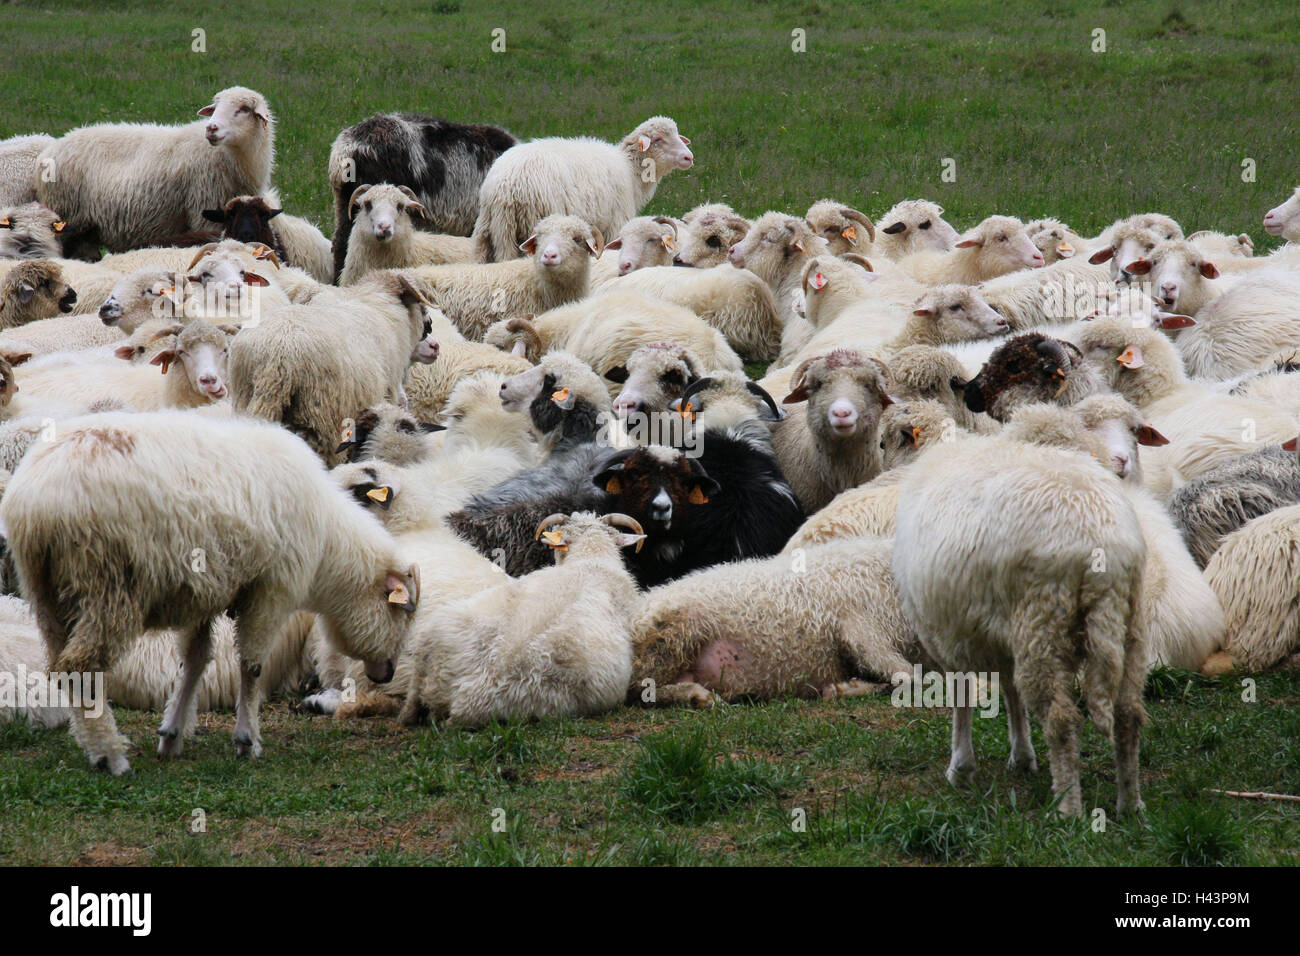 Poland, the high Tatra Mountains, flock of sheep, destination, nature, cape kinds, animals, benefit animals, mammals, focuses, sheep, agriculture, stockbreeding, cattle breeding, many, ear marks, marking, Stock Photo